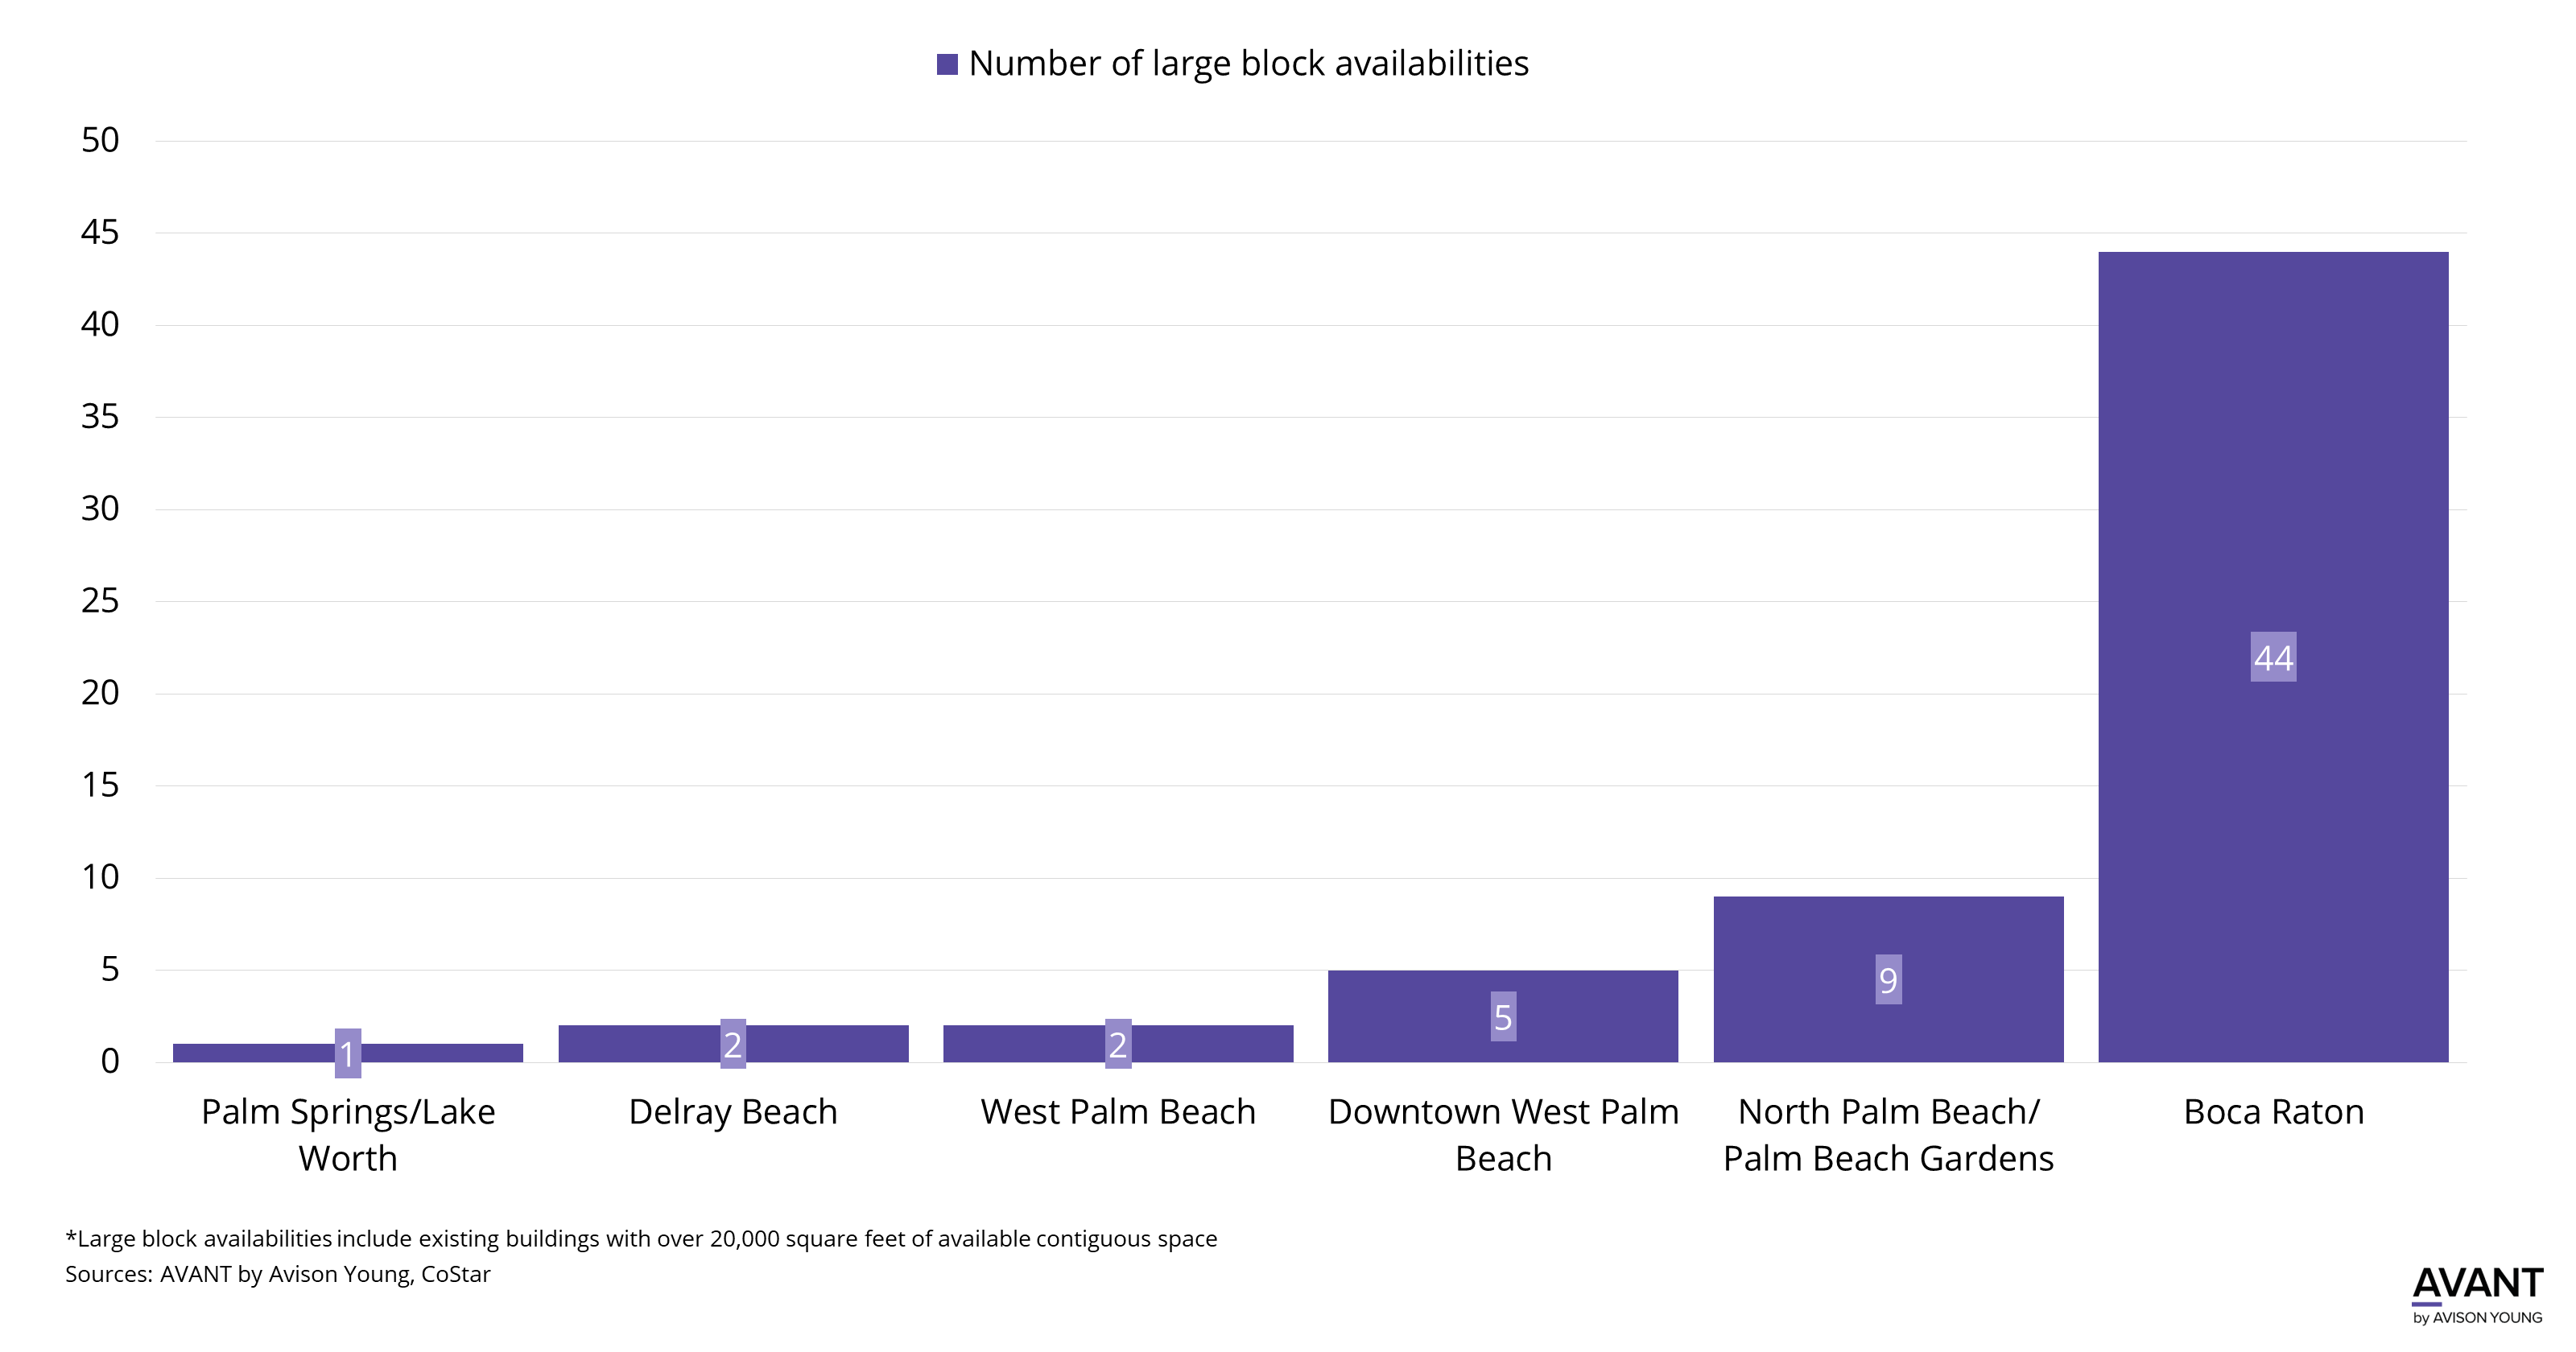 graph of number of large block availabilities in West Palm Beach office submarkets